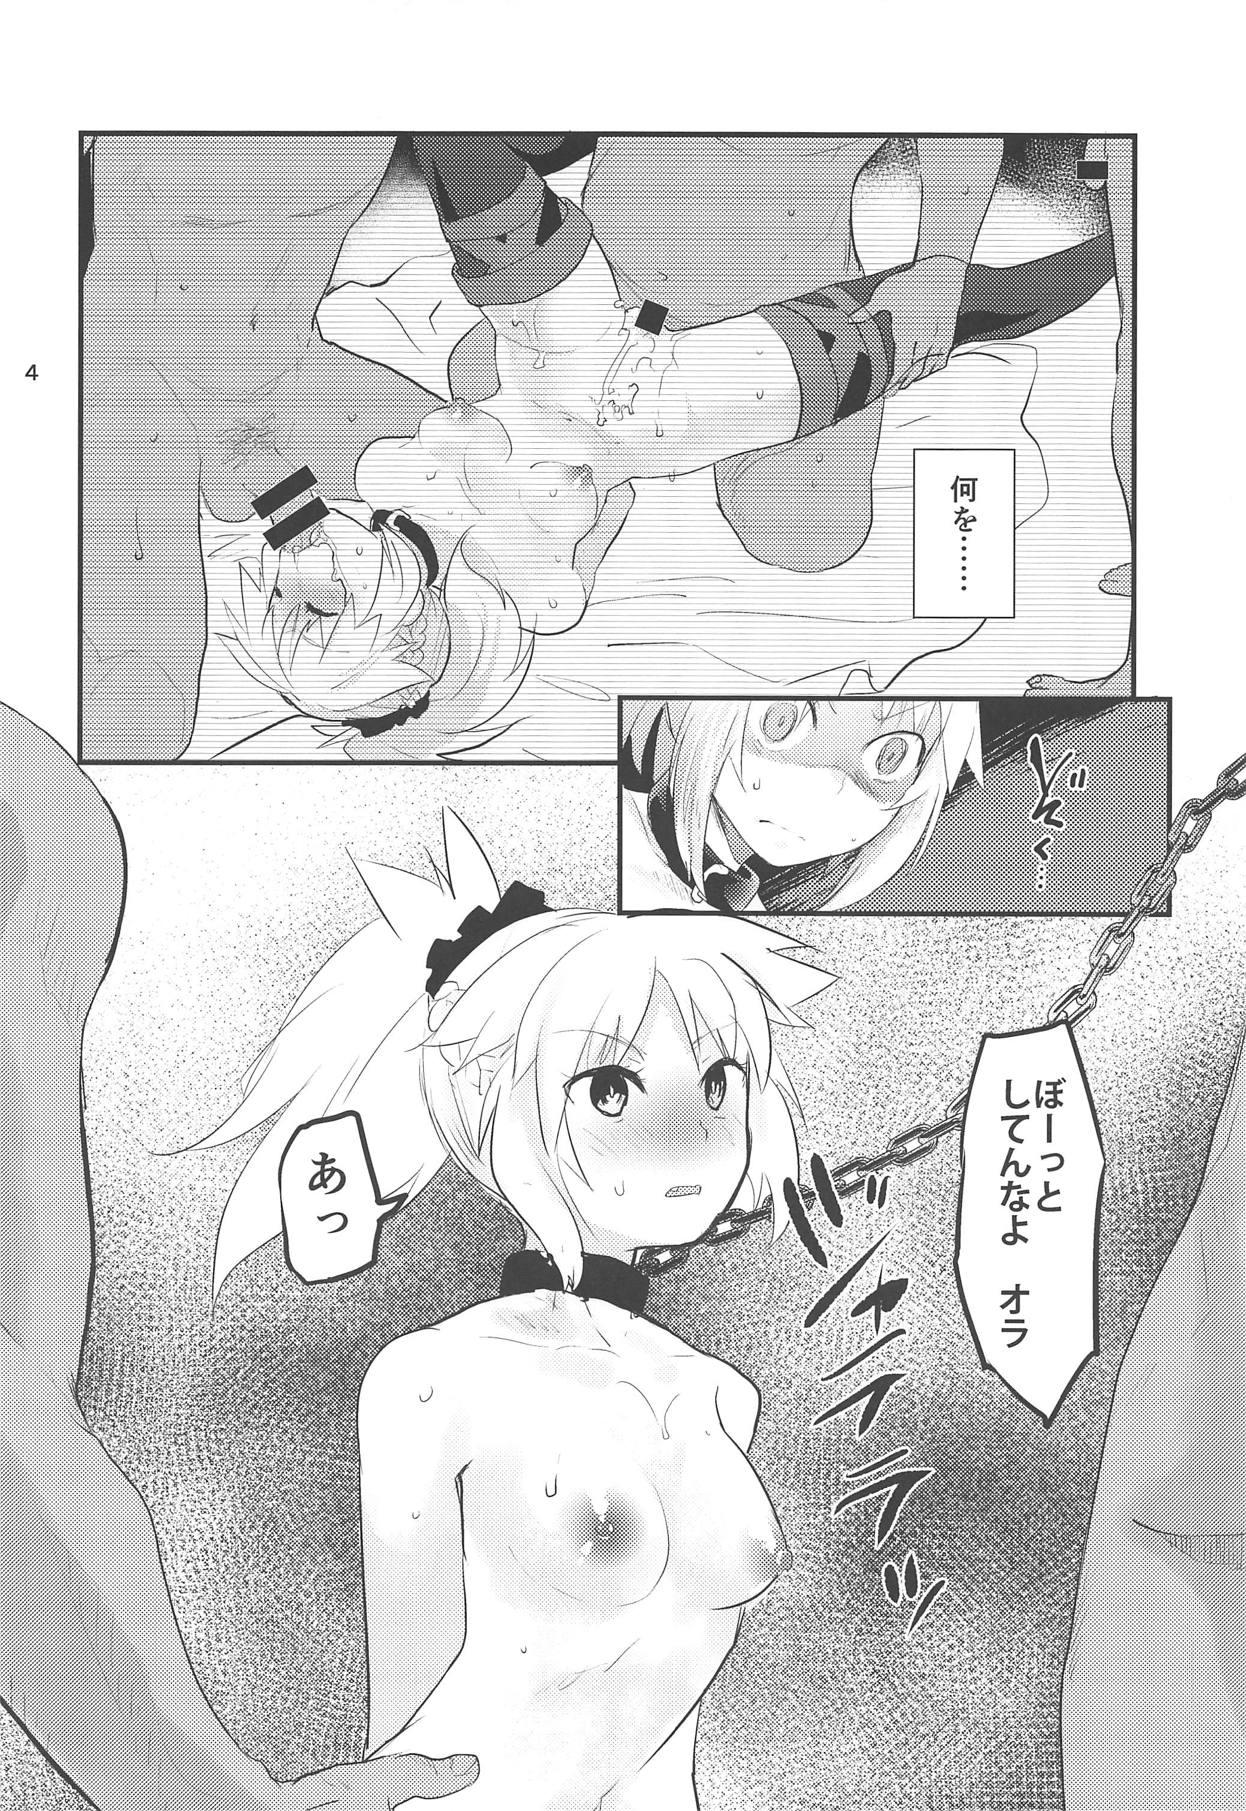 Skype Erotic to Knight - Fate grand order Licking Pussy - Page 3